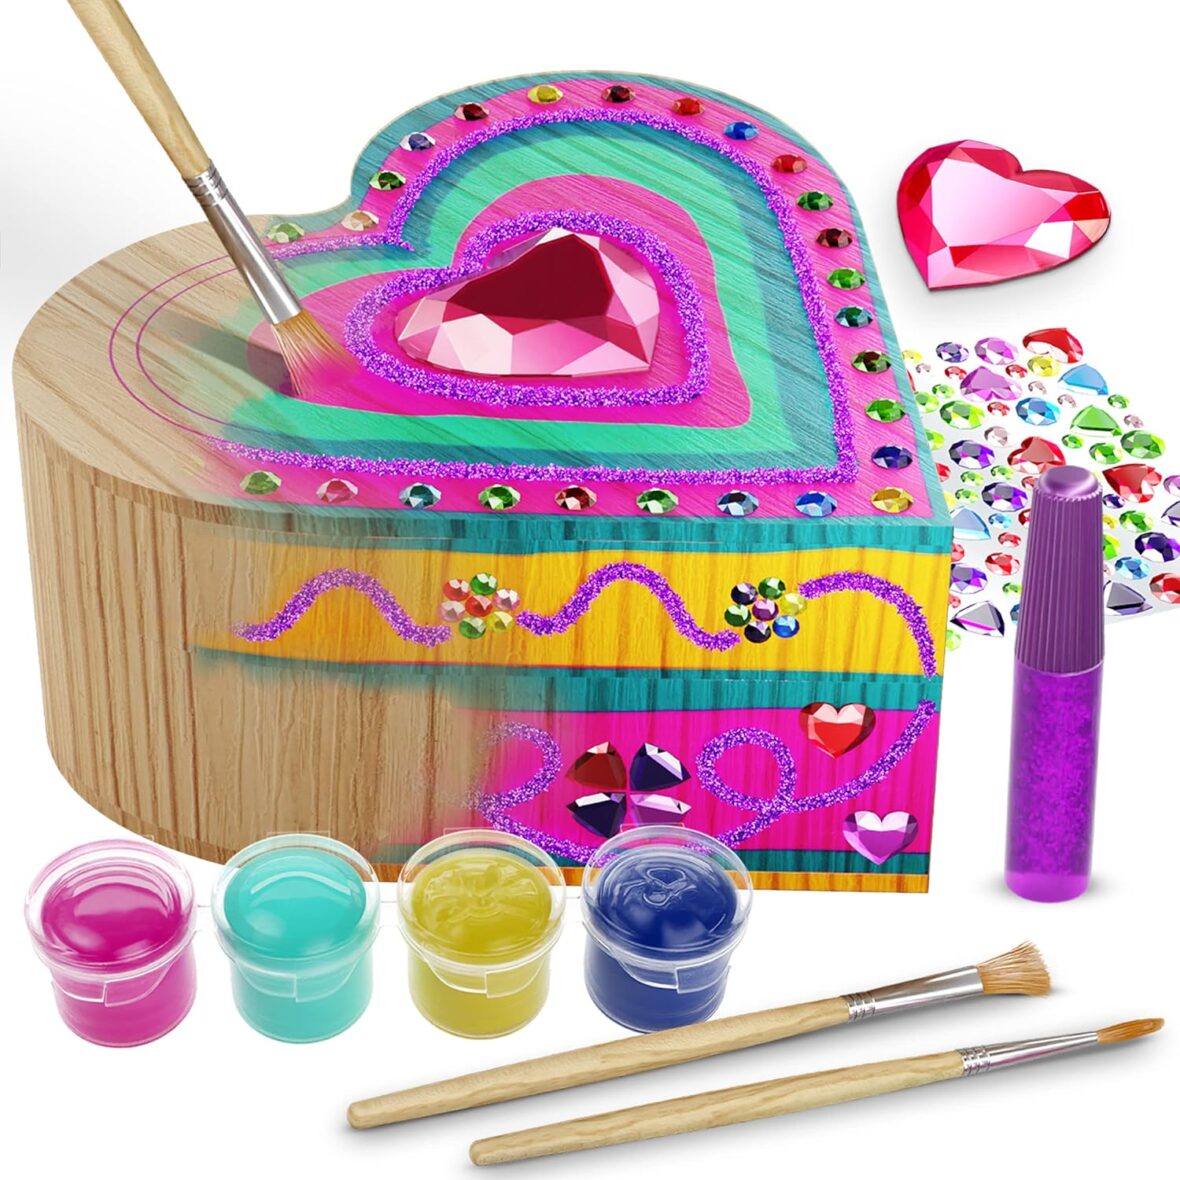 Paint Your Own Wooden Kids Heart Treasure Box Kit – Art Kits for Toddler Girl – Arts and Craft